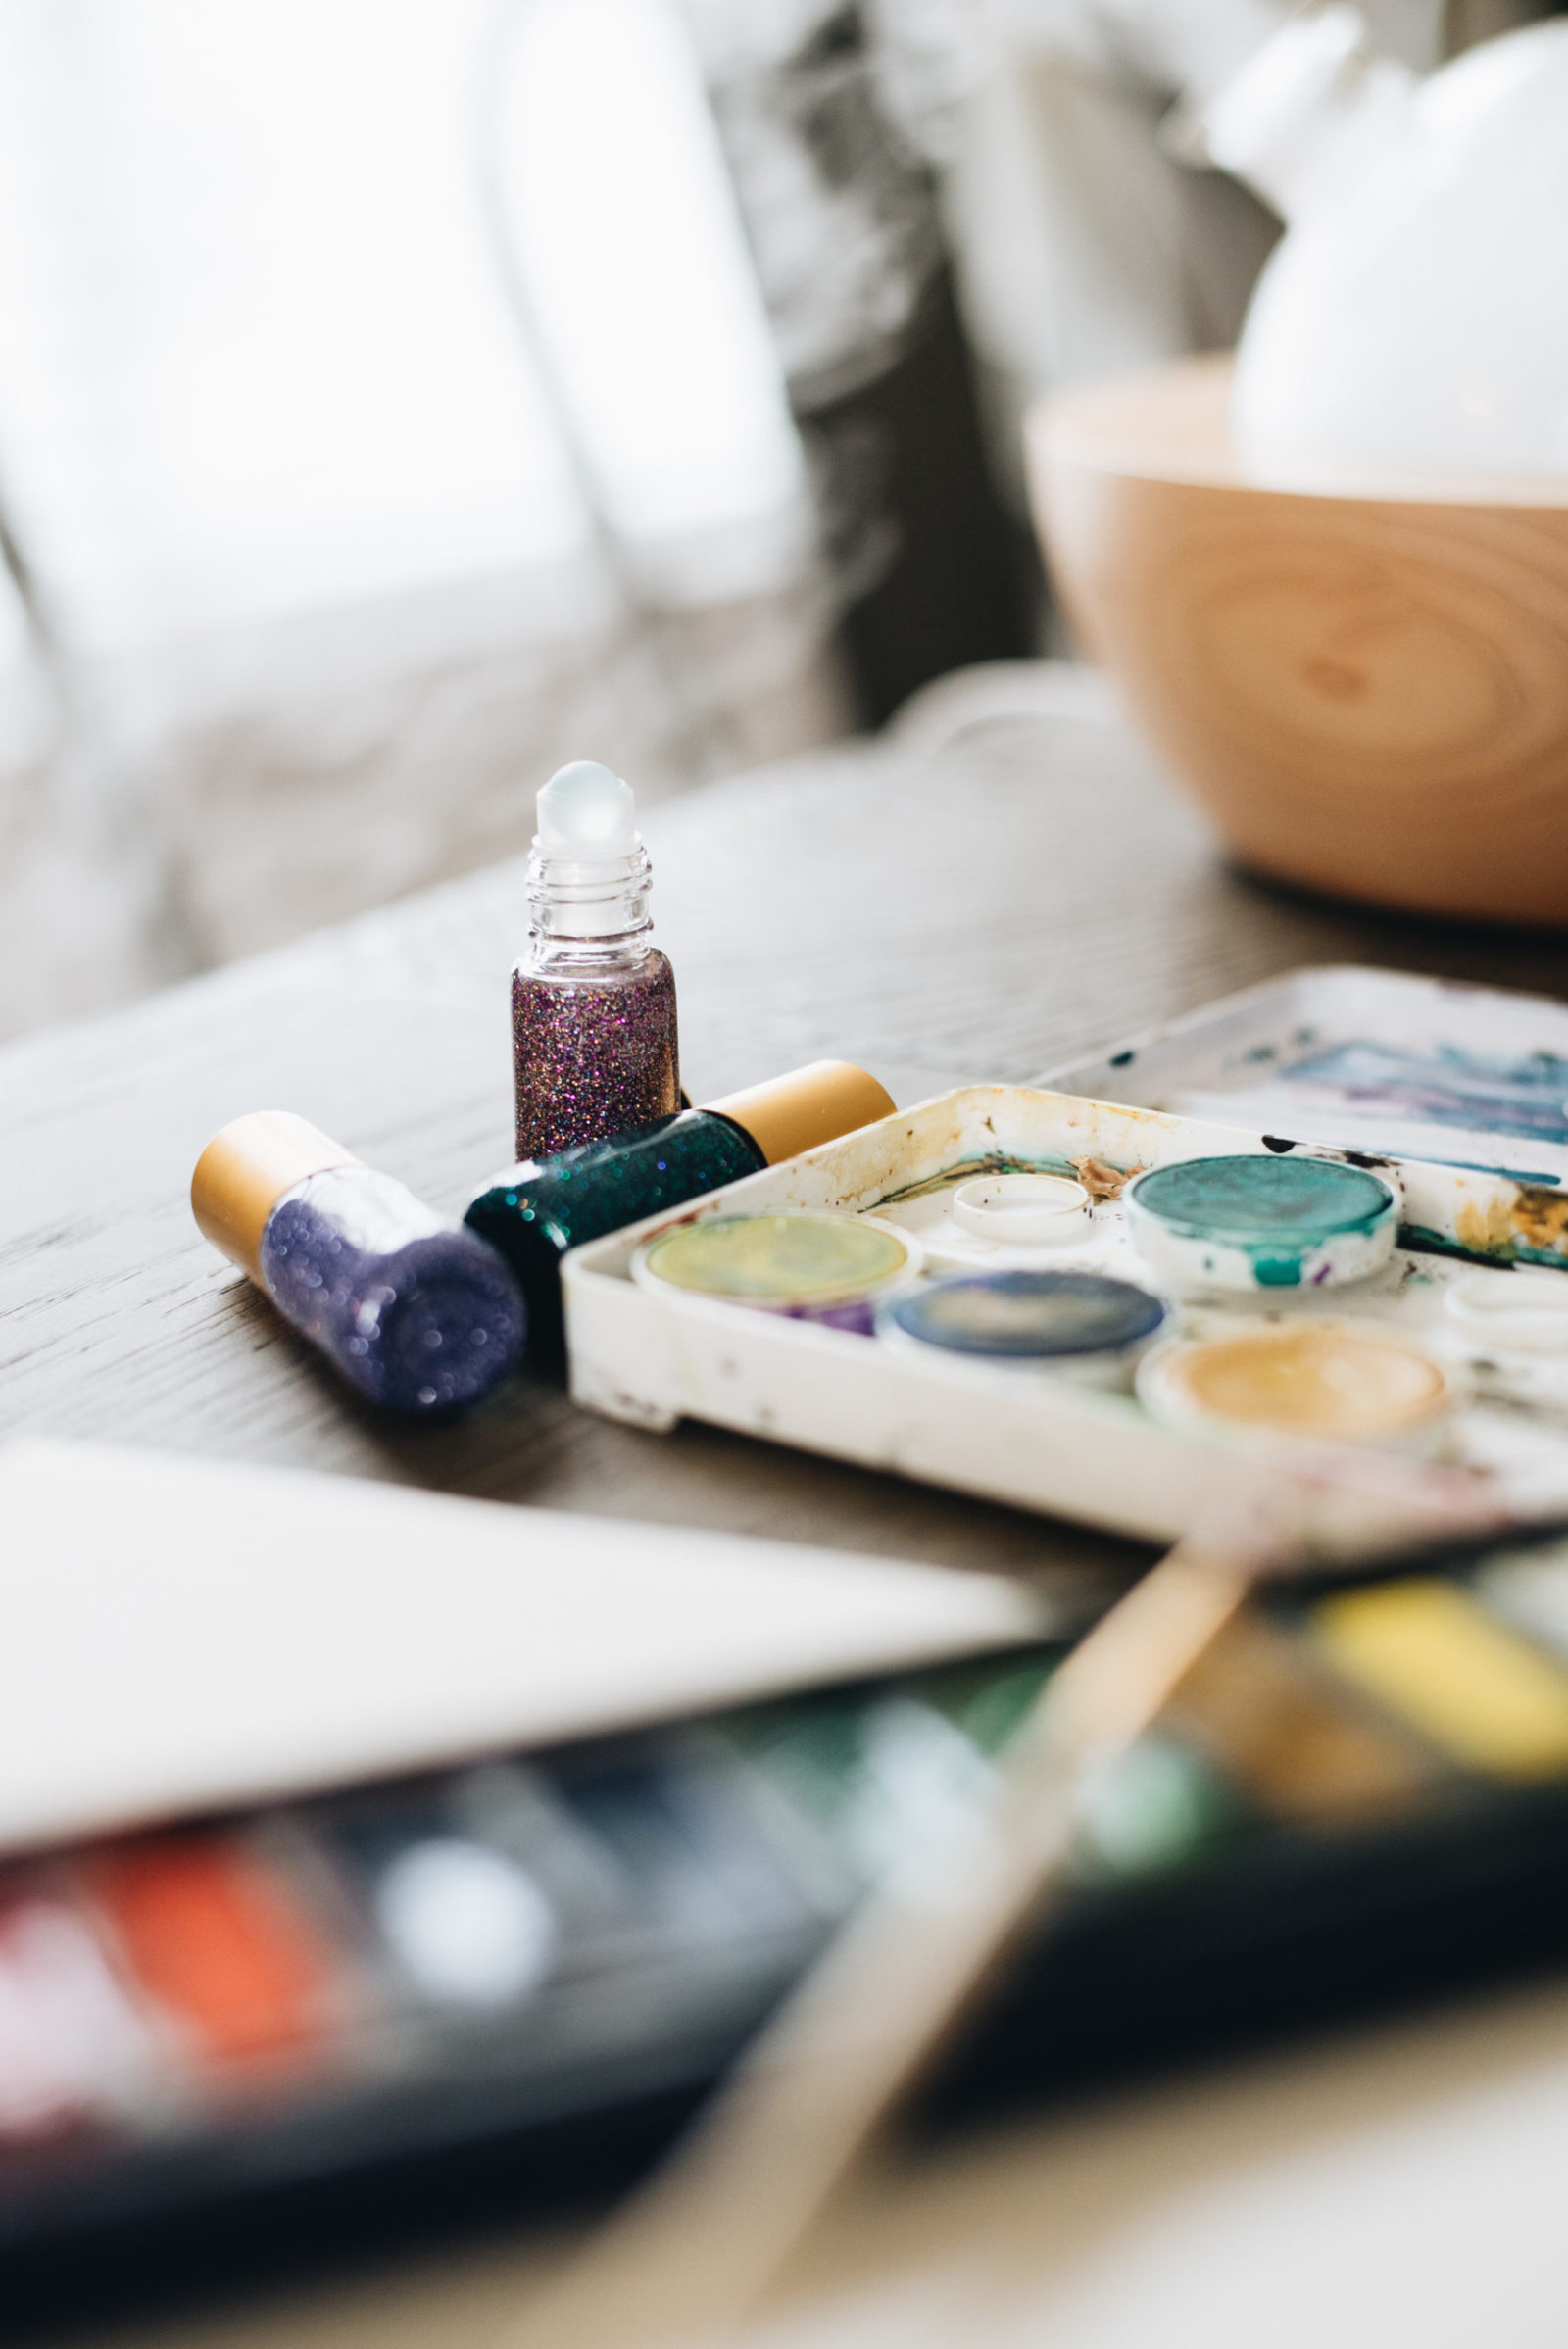 12 Art Therapy Activities To Feel More Grounded and Less Stressed | Whimsy + Wellness